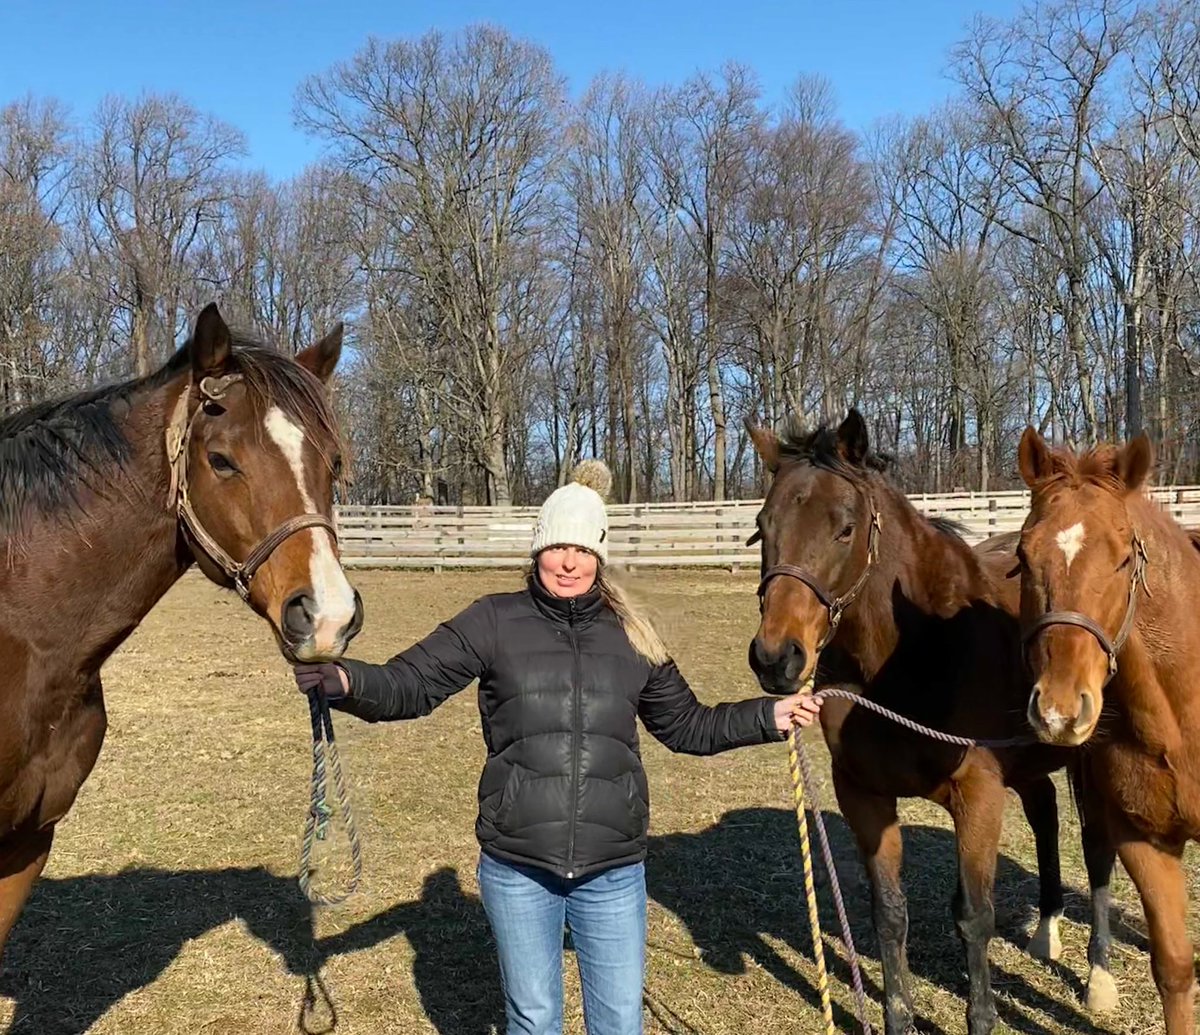 Happy Birthday to my three favorite Thoroughbreds! (L to R) Dancing With Maude 2014, Zabarajad 2008, Moran Gra 2007. Everybody is growing up so fast! ❤️❤️❤️ #StakesPlaced #StakesPlaced #StakesWinner #OTTB